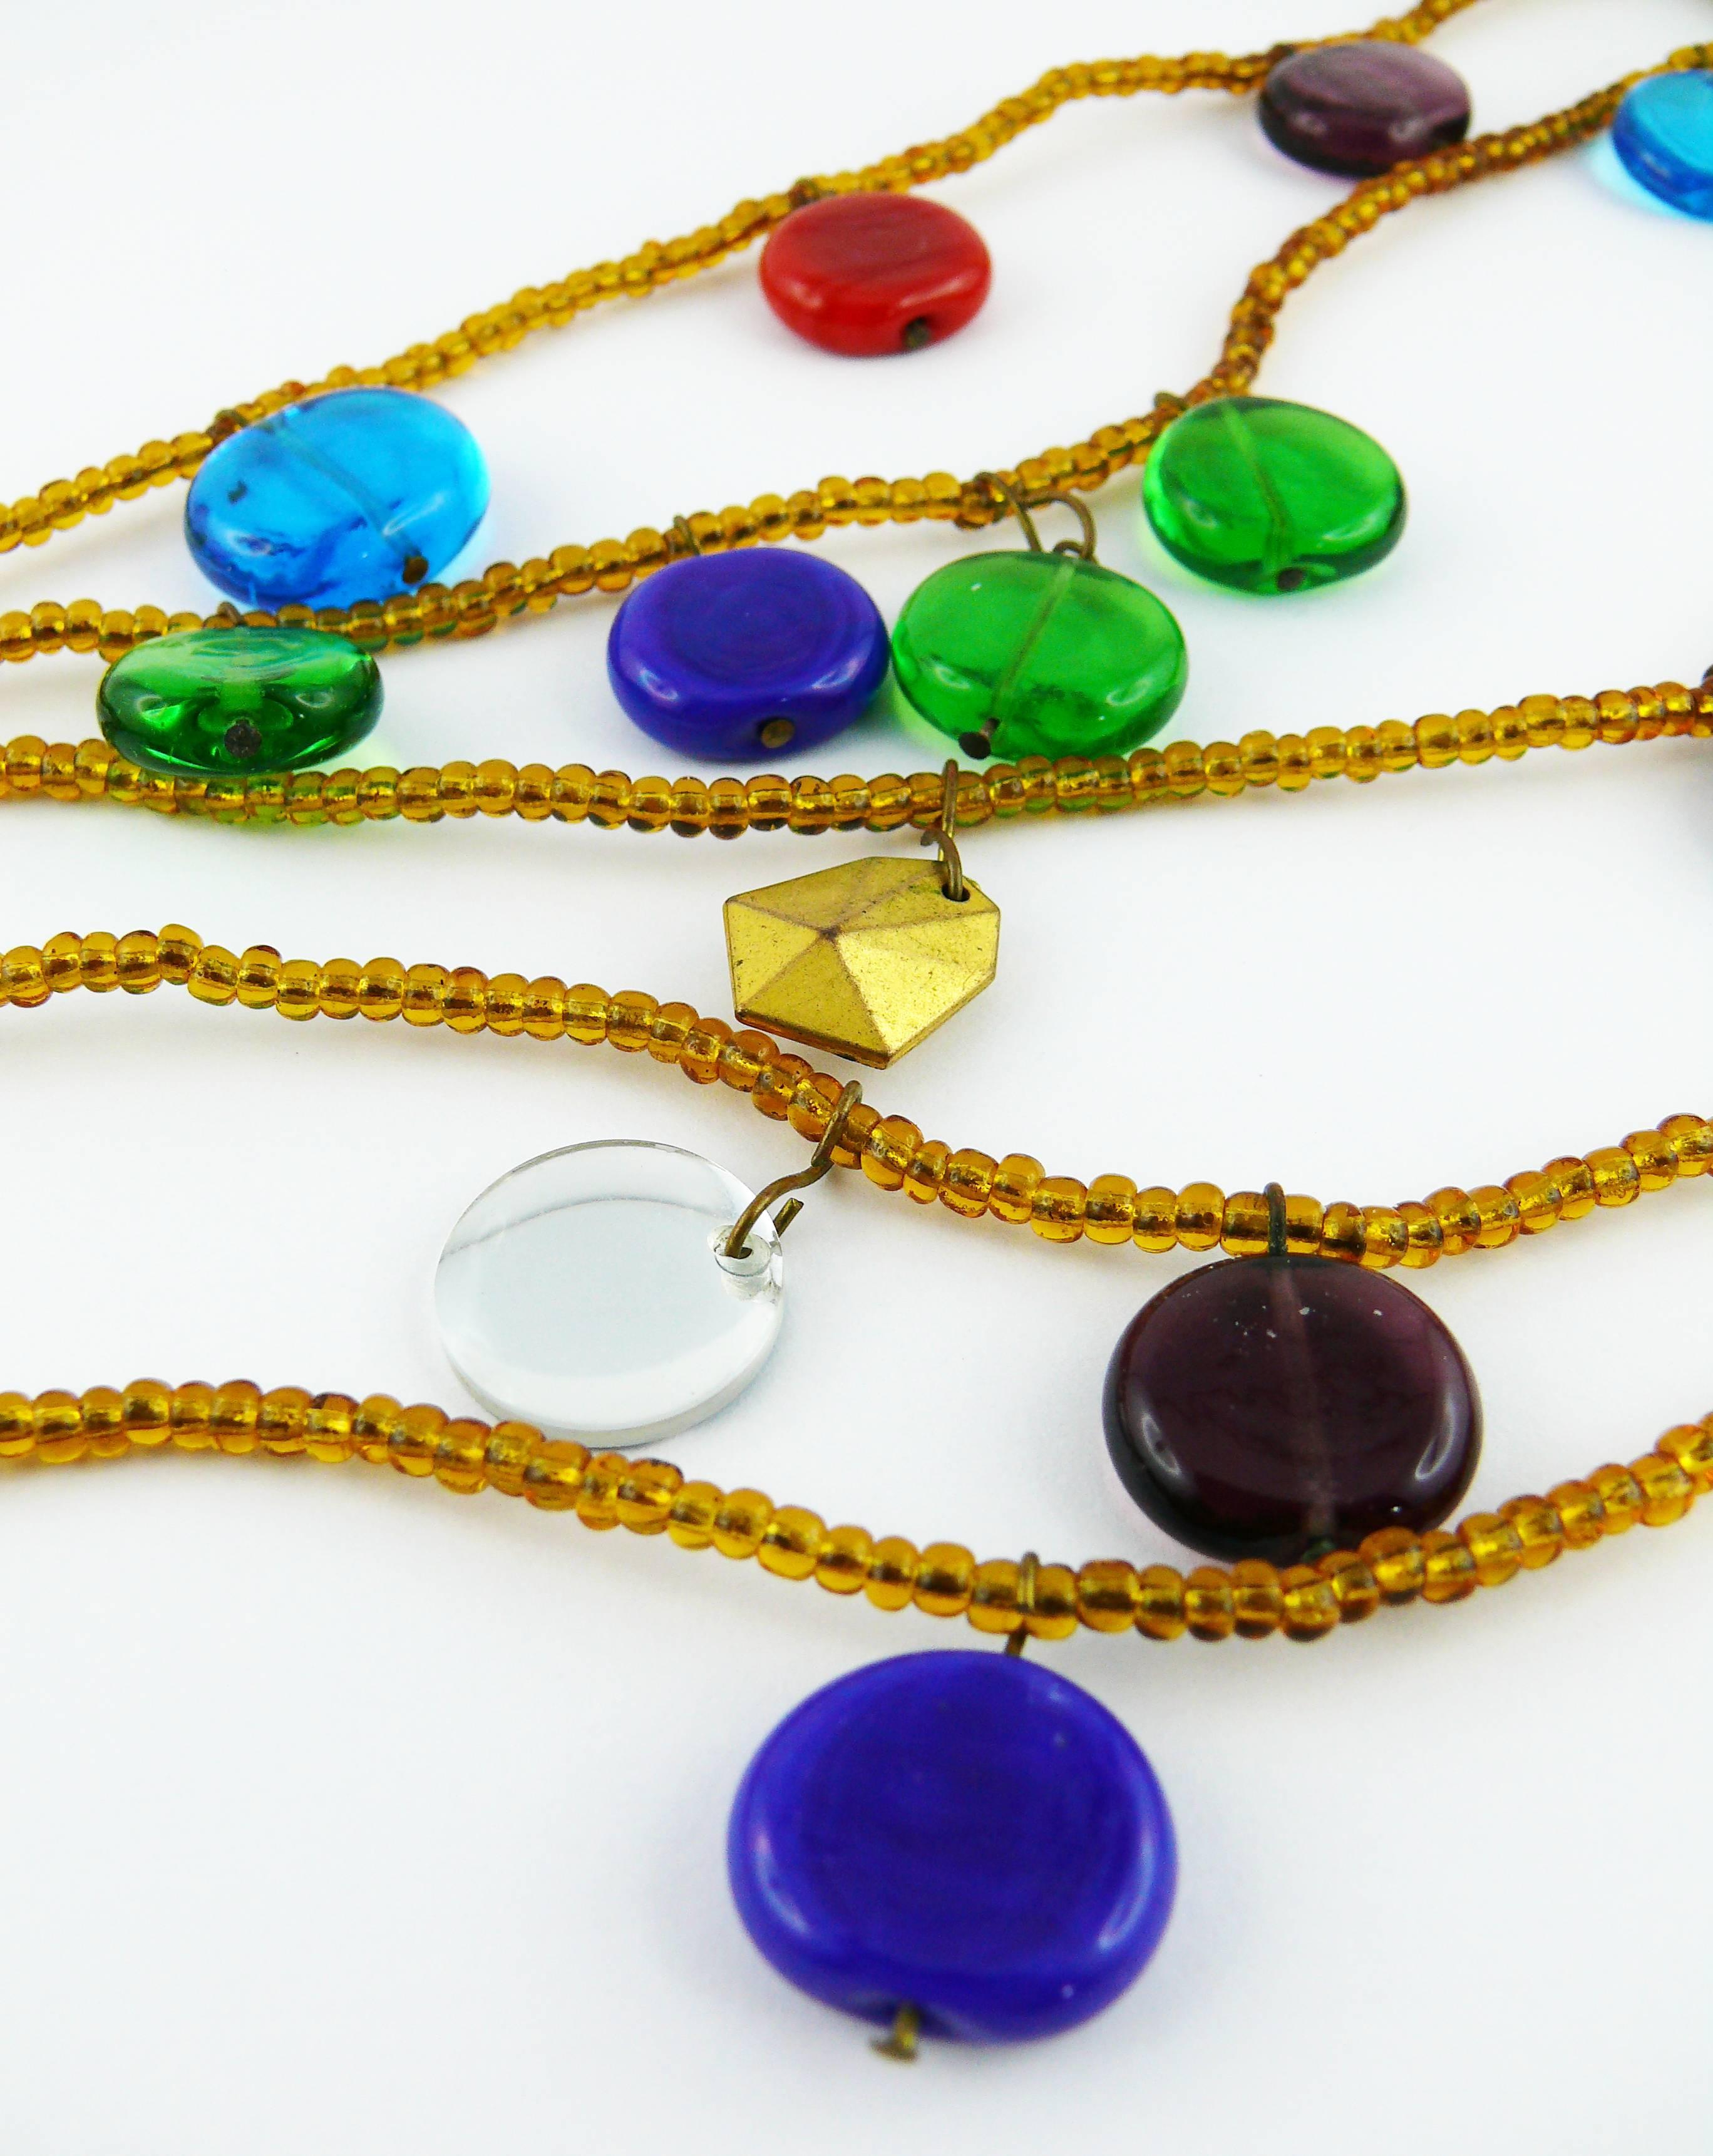 Yves Saint Laurent YSL Vintage Rare Pate de Verre Multi Strand Necklace In Good Condition For Sale In Nice, FR